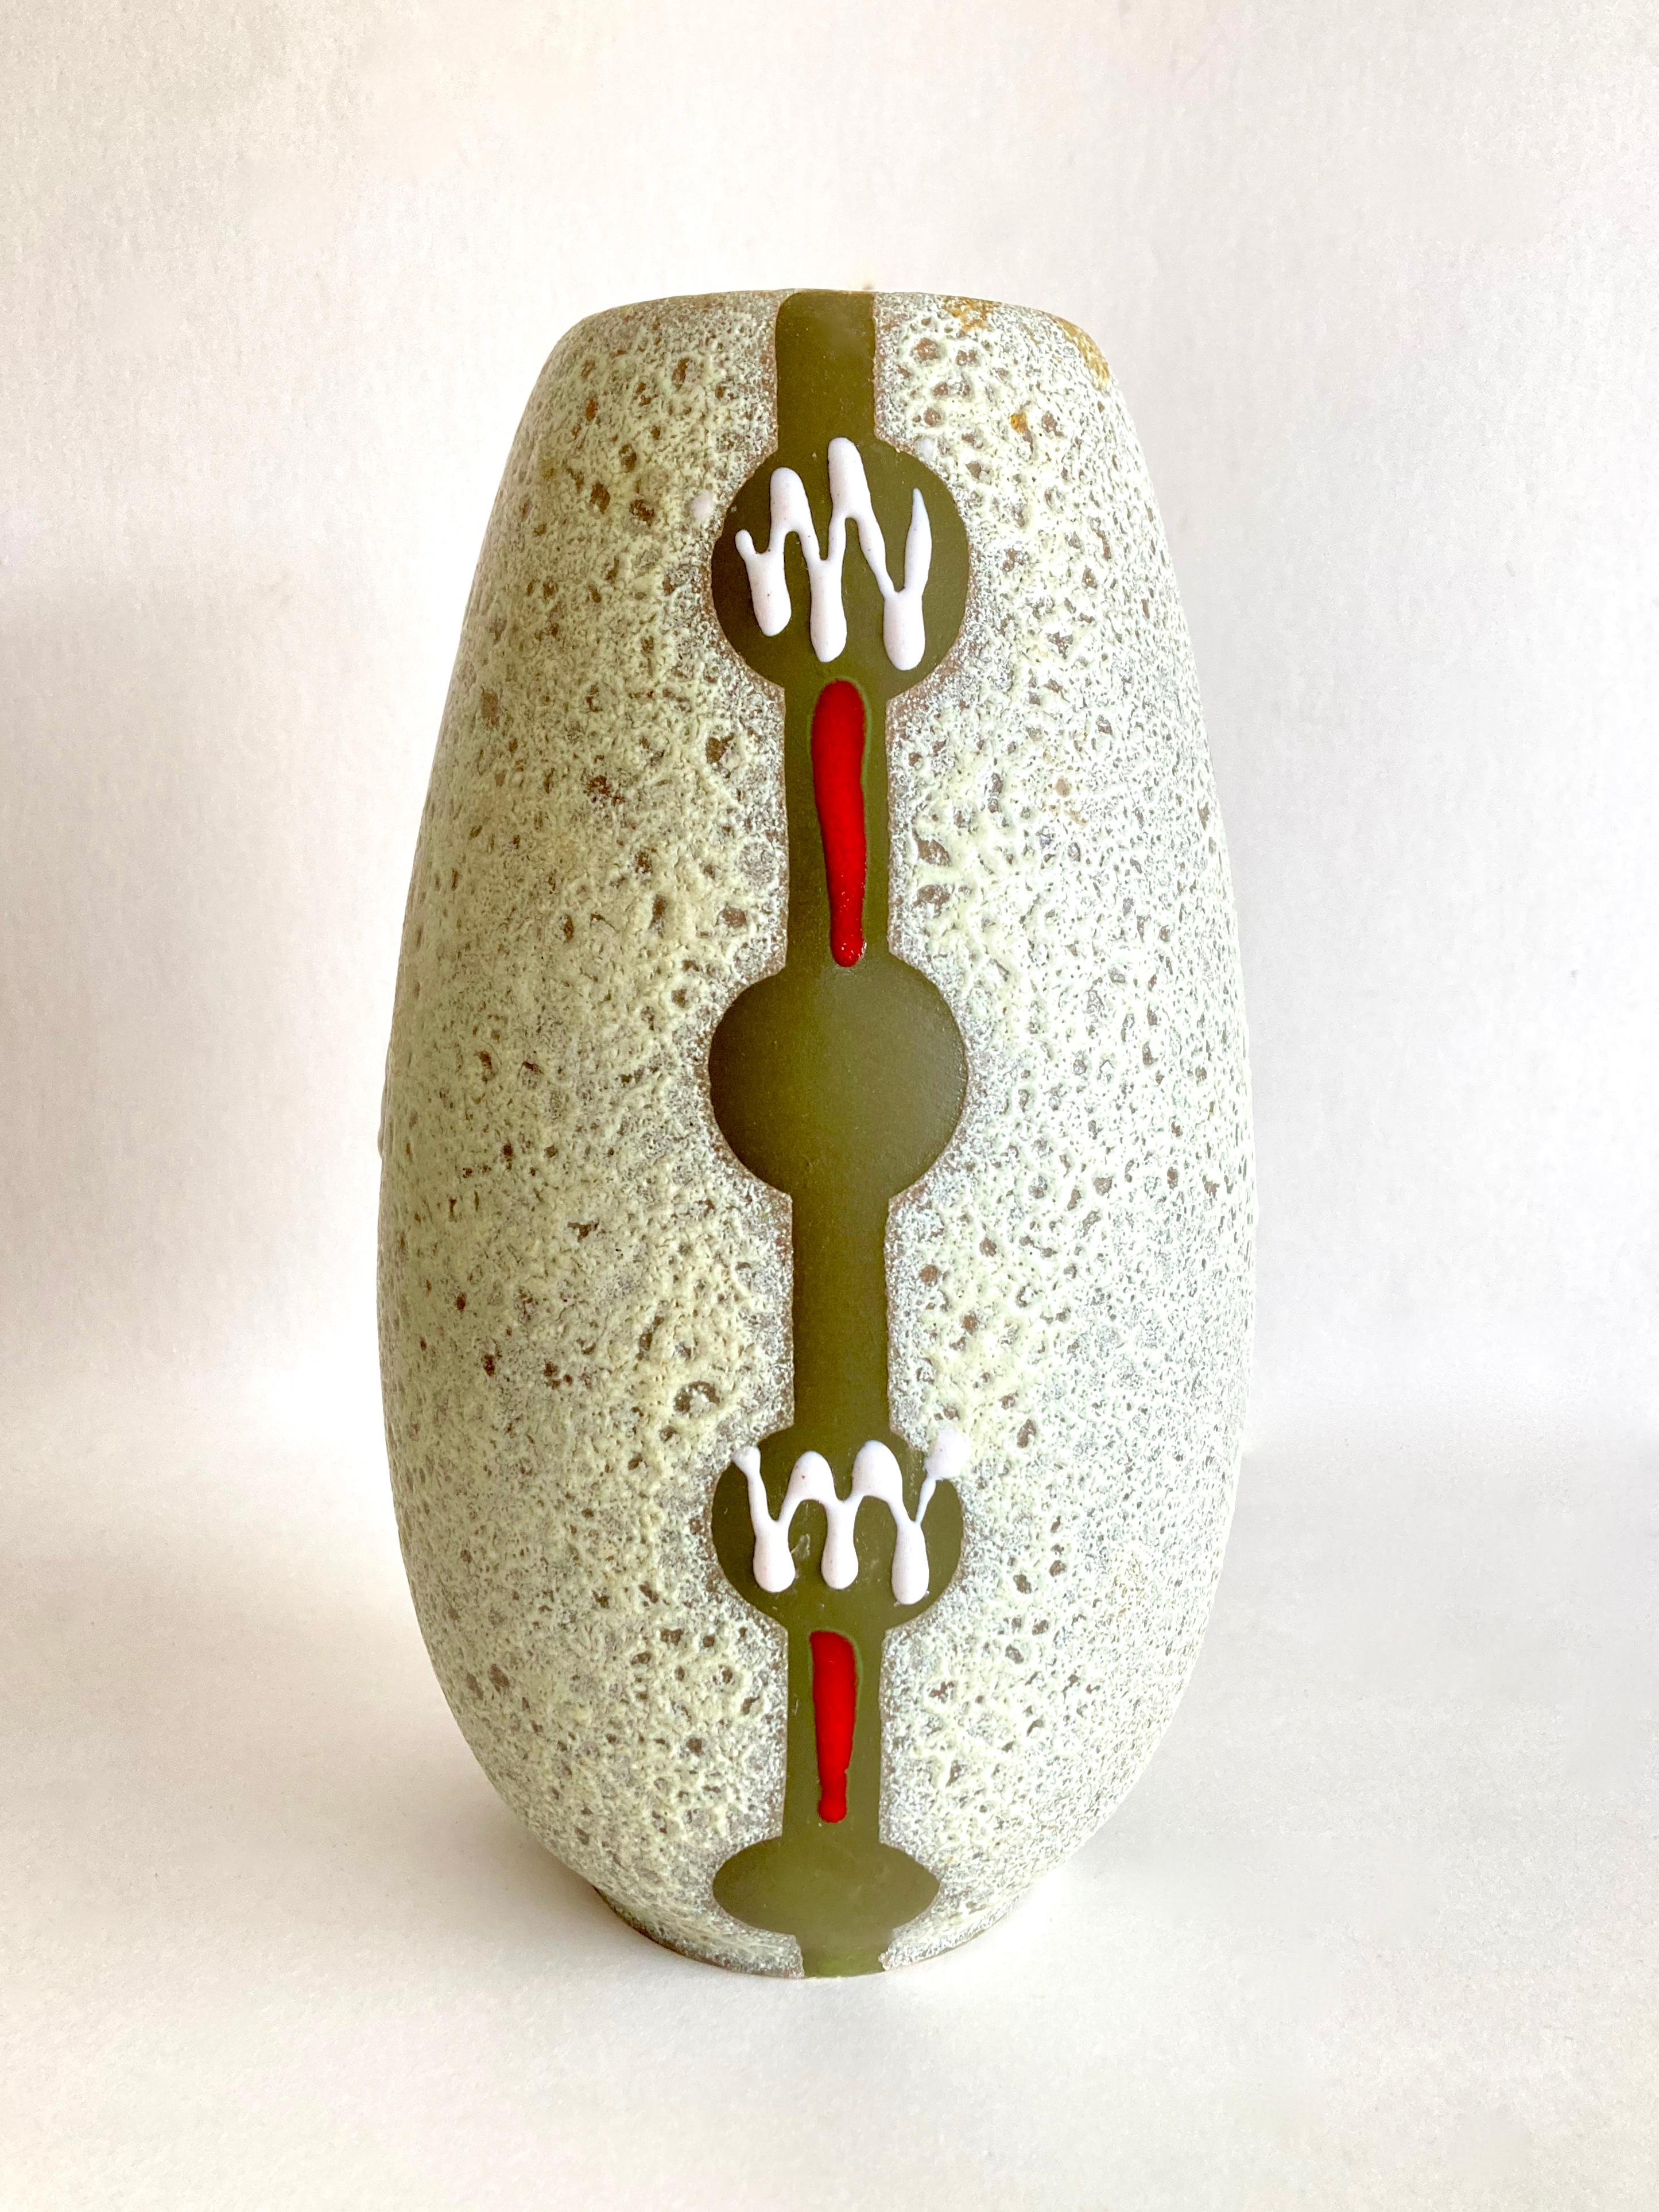 A striking mid-century modern 1950s fat lava vase by the renowned West German pottery maker Jasba Keramik. The company was founded in 1926 by Jakob Schwaderlapp in Ransbach-Baumbach and until its end in the late 1970s, it was famous for producing a